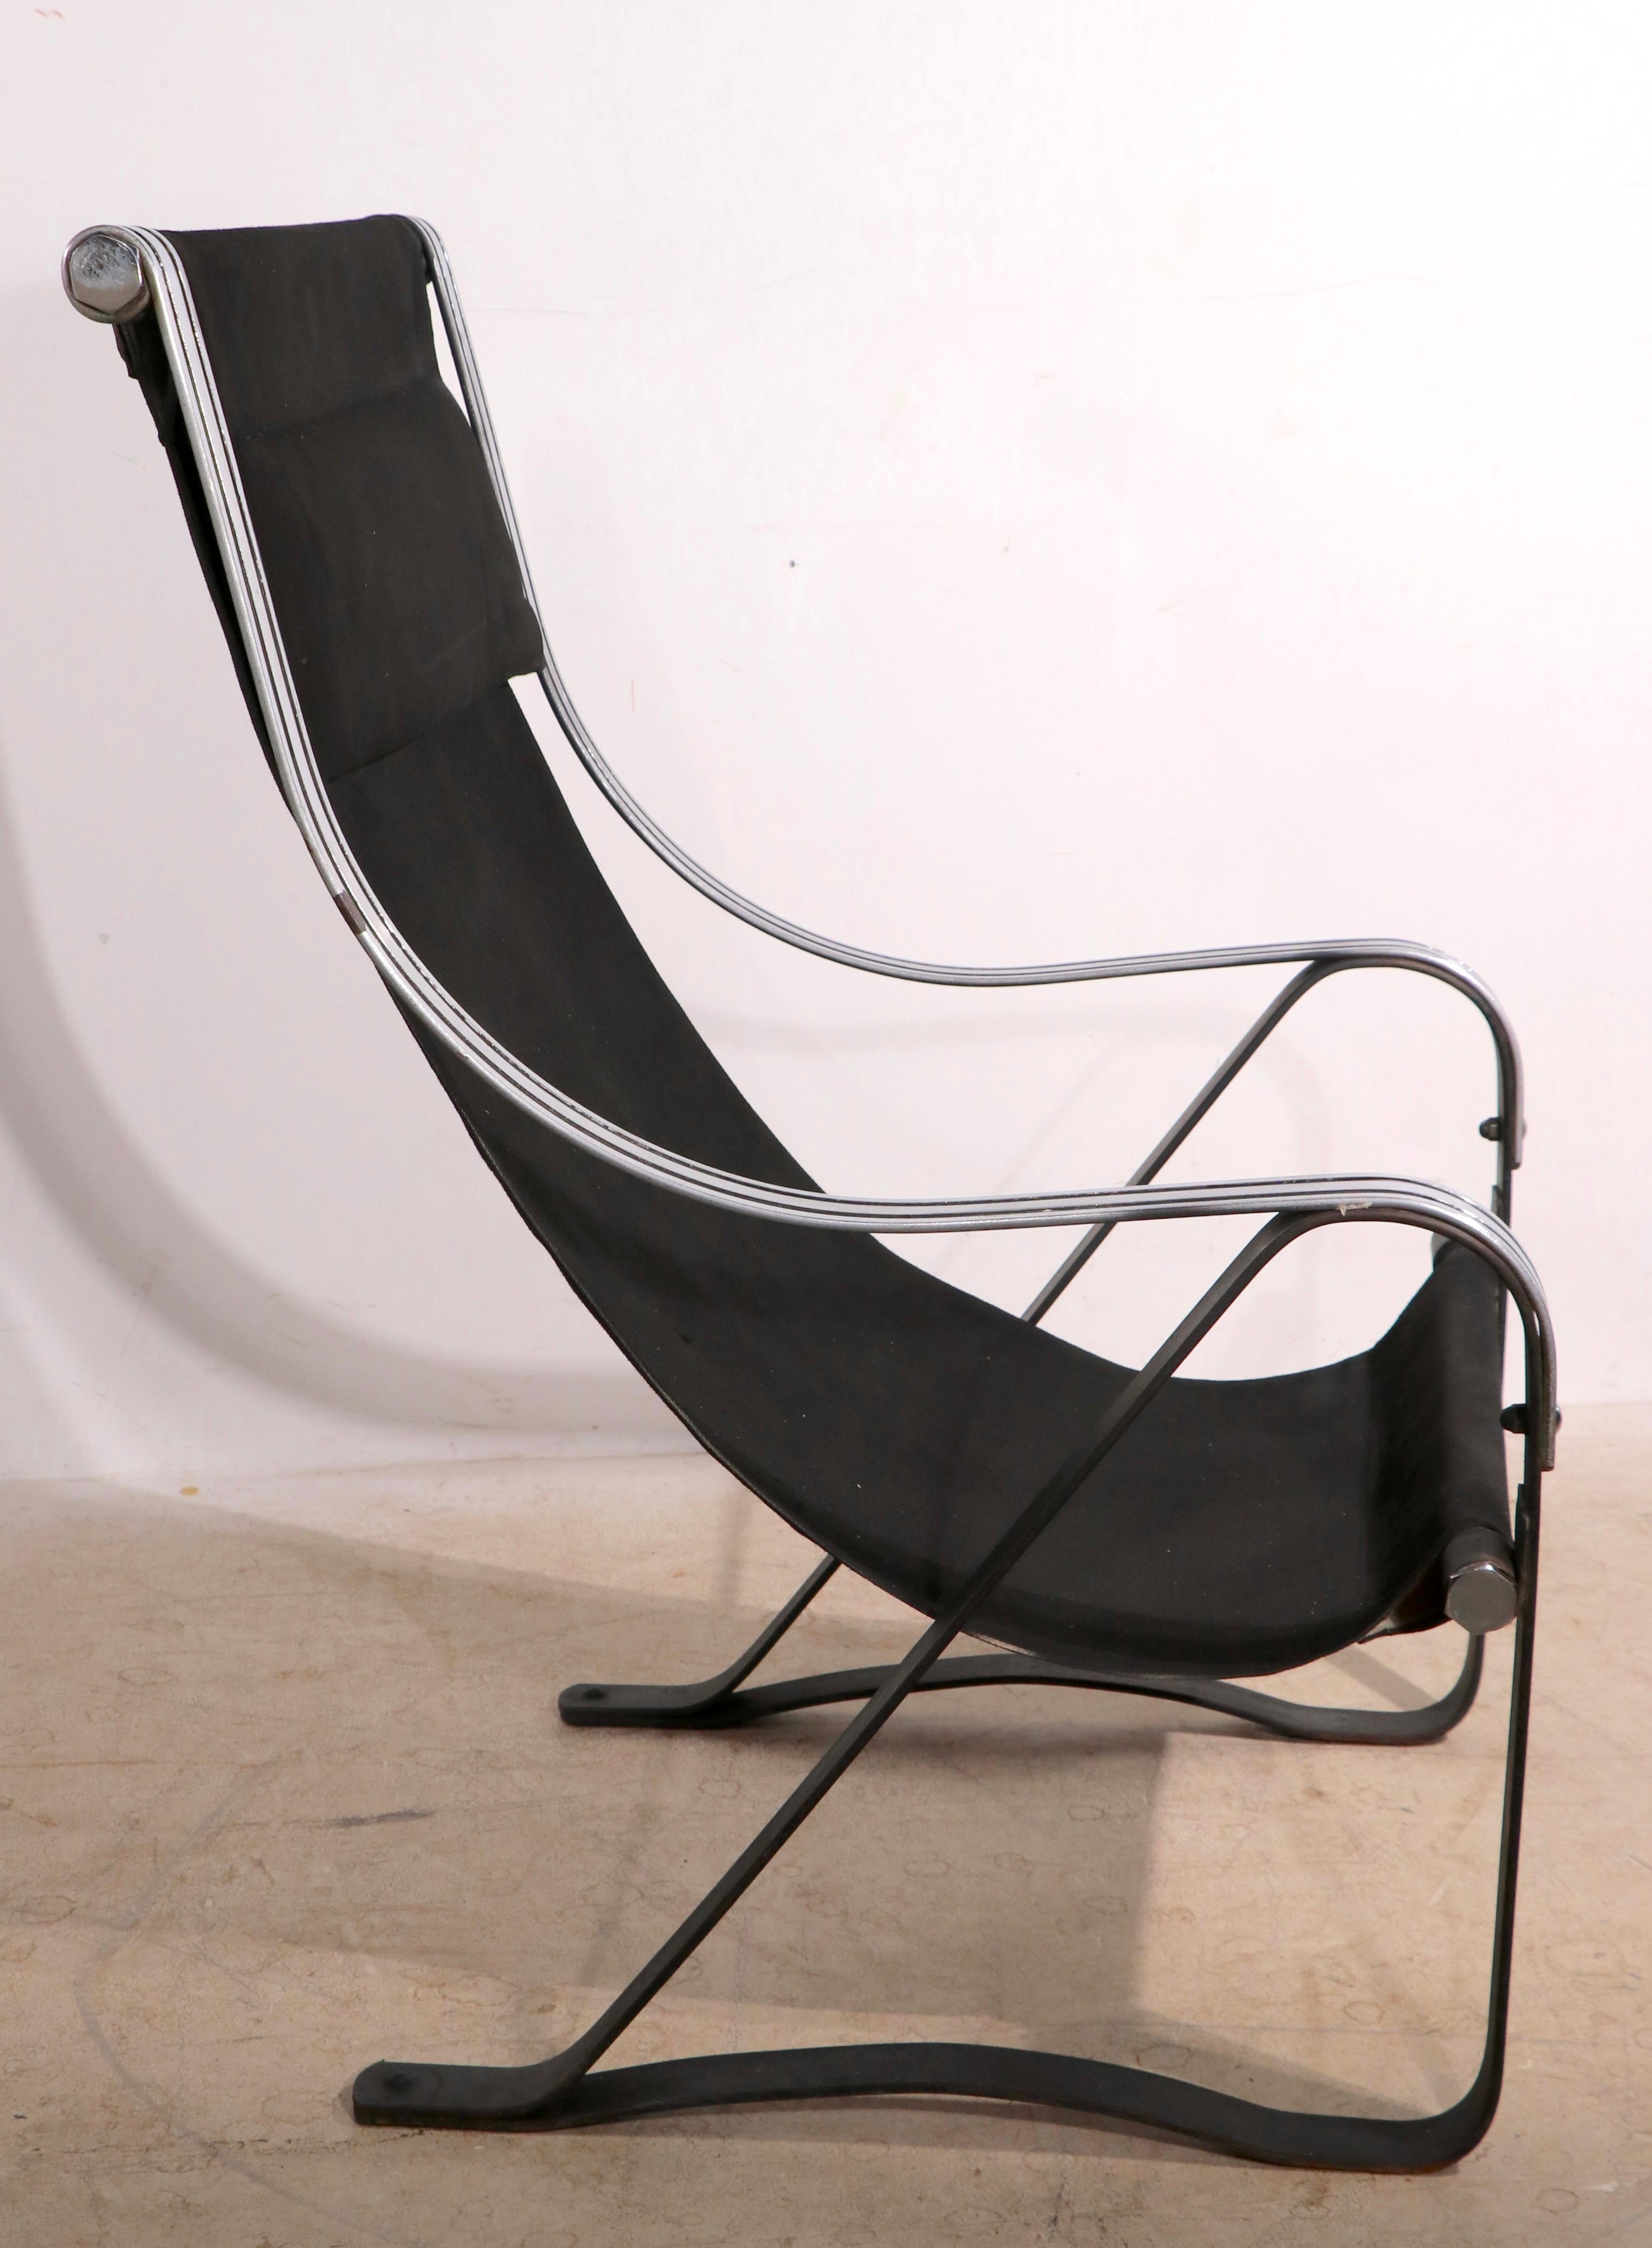 Iconic Art Deco, Machine Age sling seat lounge chair having elegant chrome and black arms on a blacked steel spring base. The chair is in overall very good condition, the chrome is bright and shiny, it shows one inconsequential flaw ( loss of